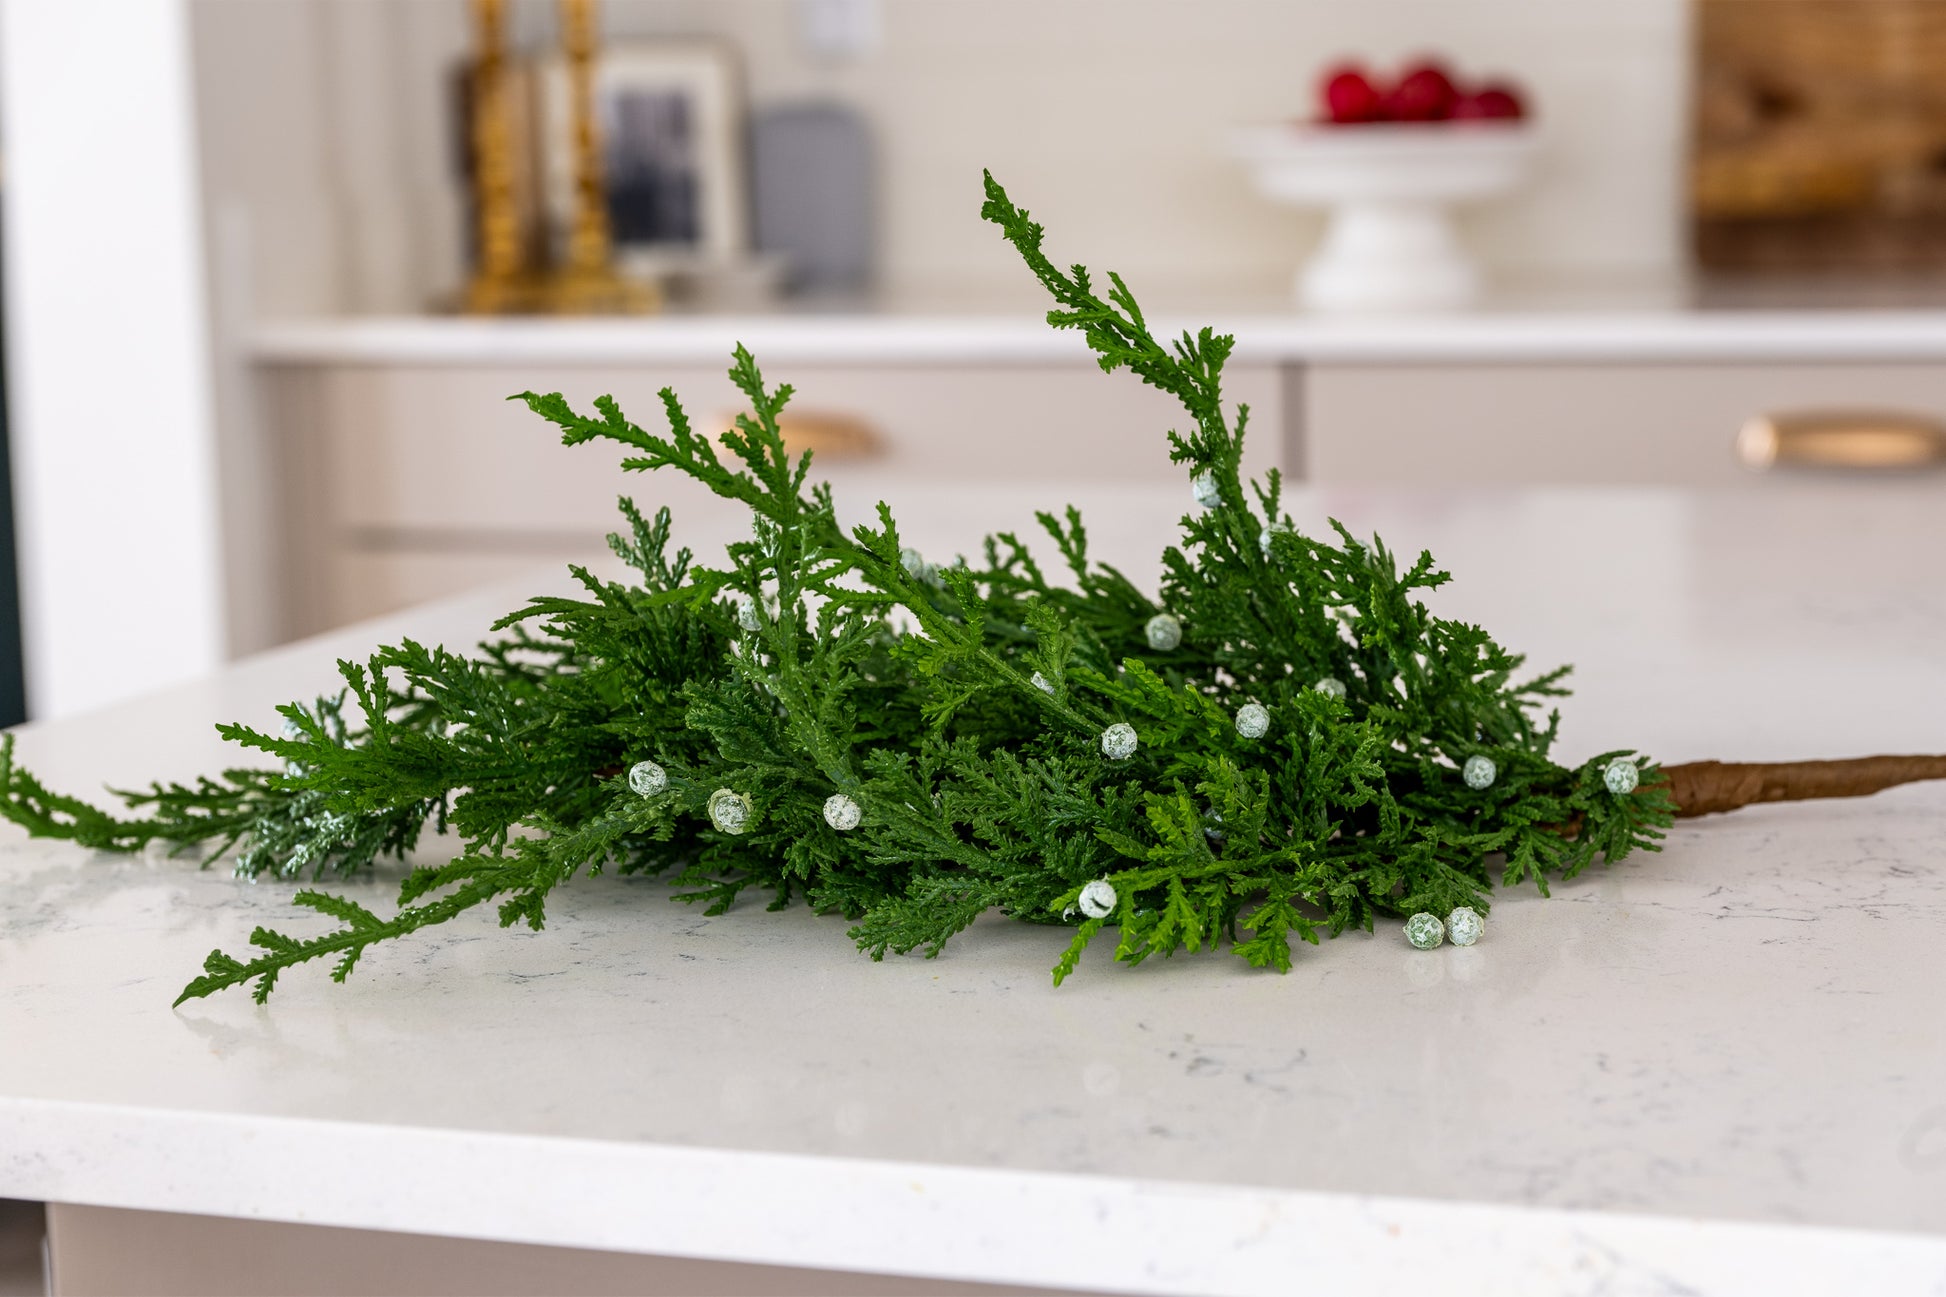 Artificial juniper greenery branch for holiday decorating featuring lifelike greenery and white berries with a greenish-blue undertone, against backdrop of neutral kitchen. 